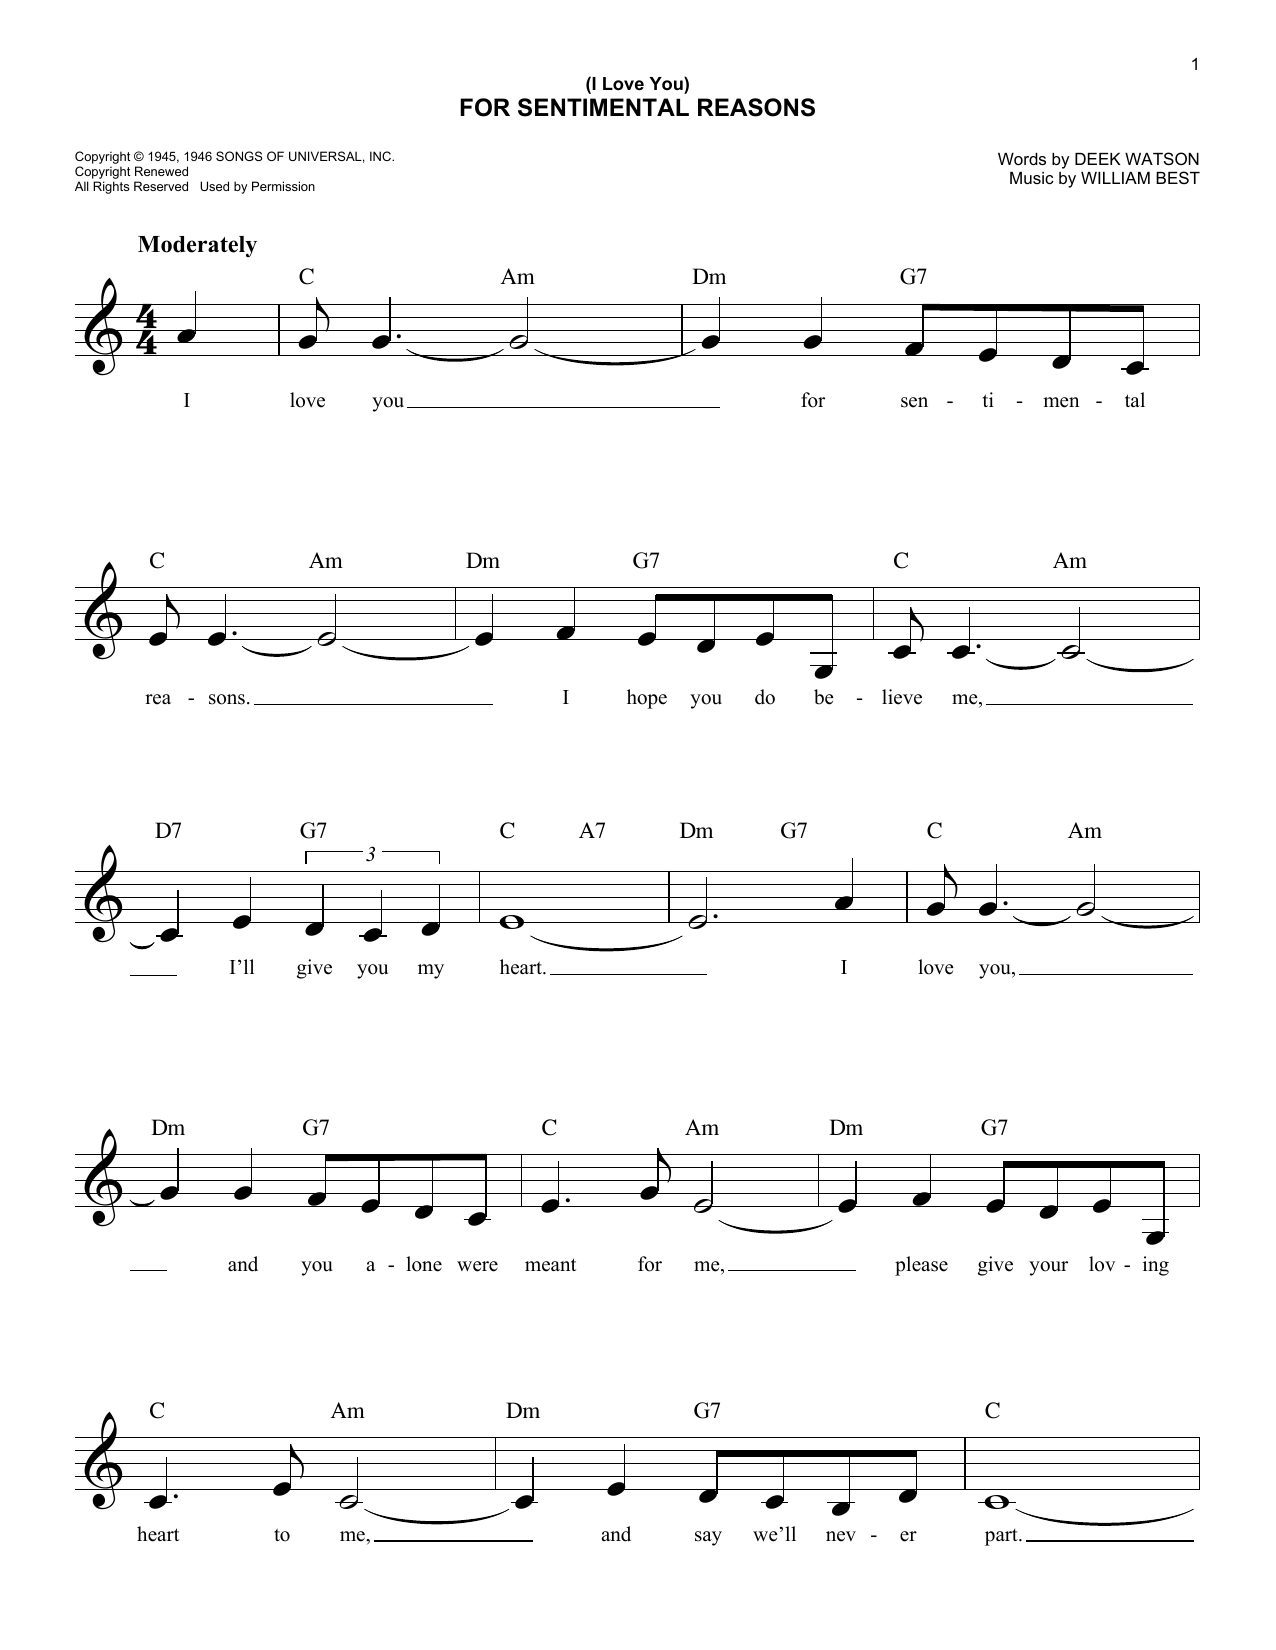 Download King Cole Trio (I Love You) For Sentimental Reasons Sheet Music